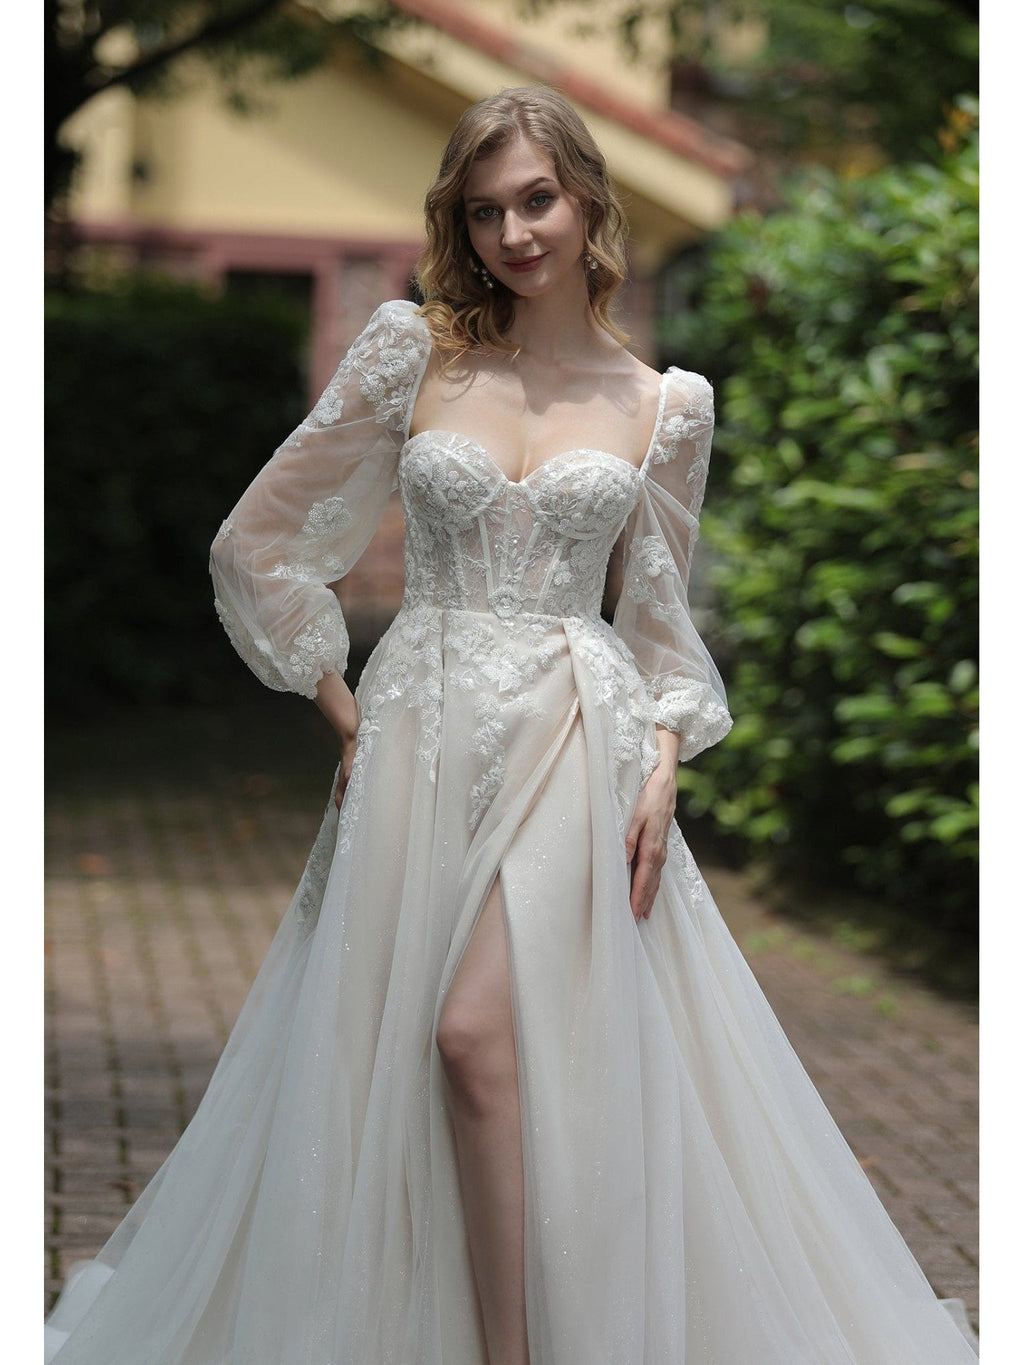 Trinity tulle 3 way wedding gown in ivory/champagne s8 Express NZ wide - Bay Bridal and Ball Gowns